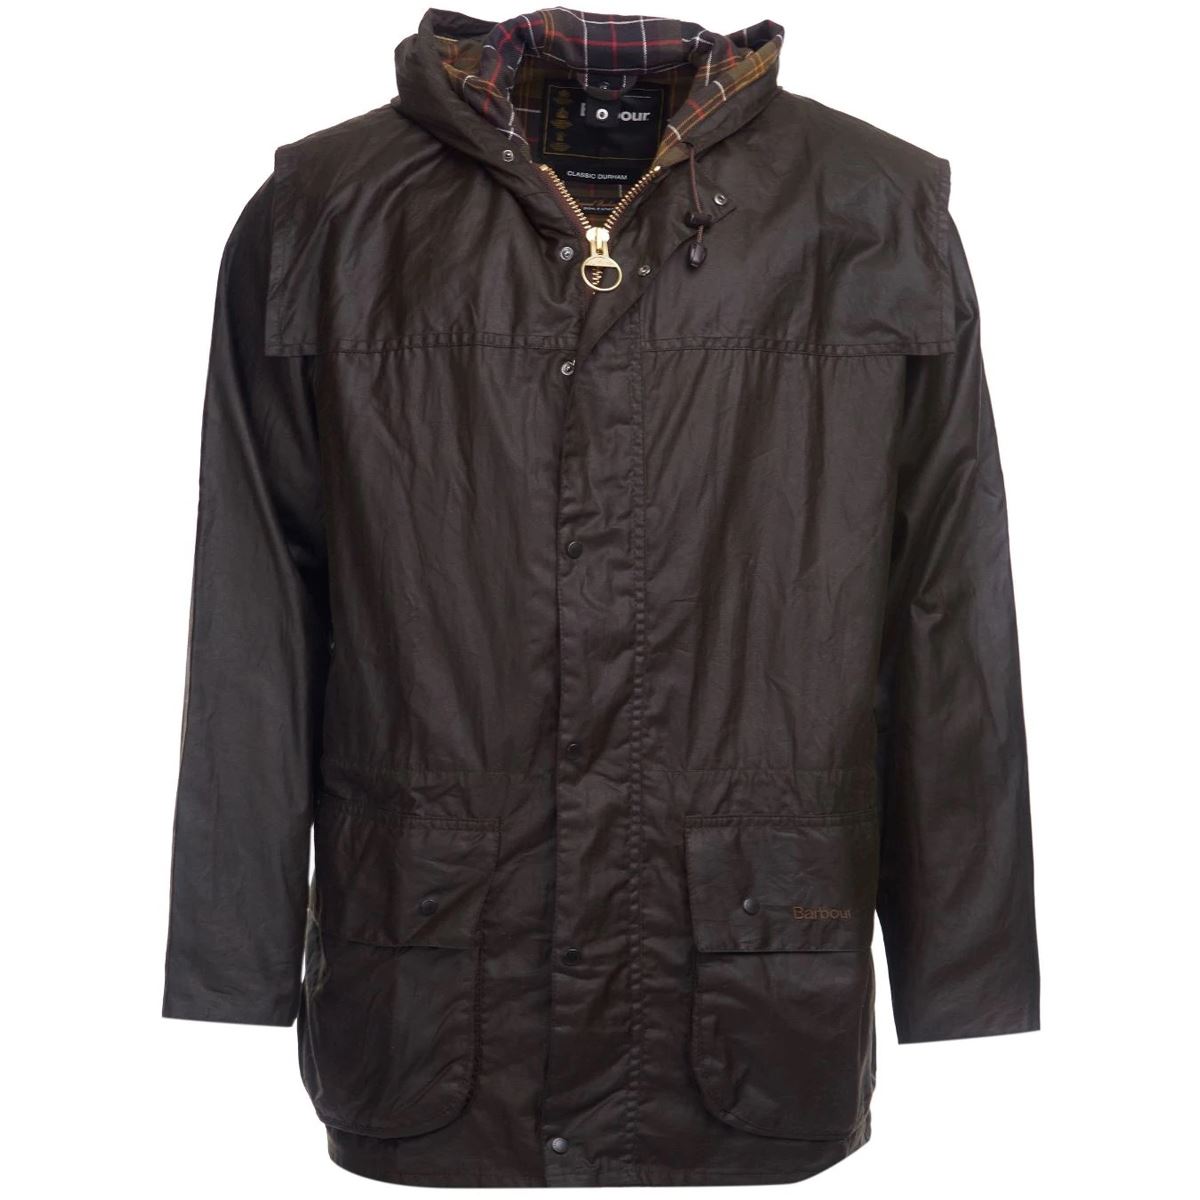 What are the sizes for the barbour durham jacket?